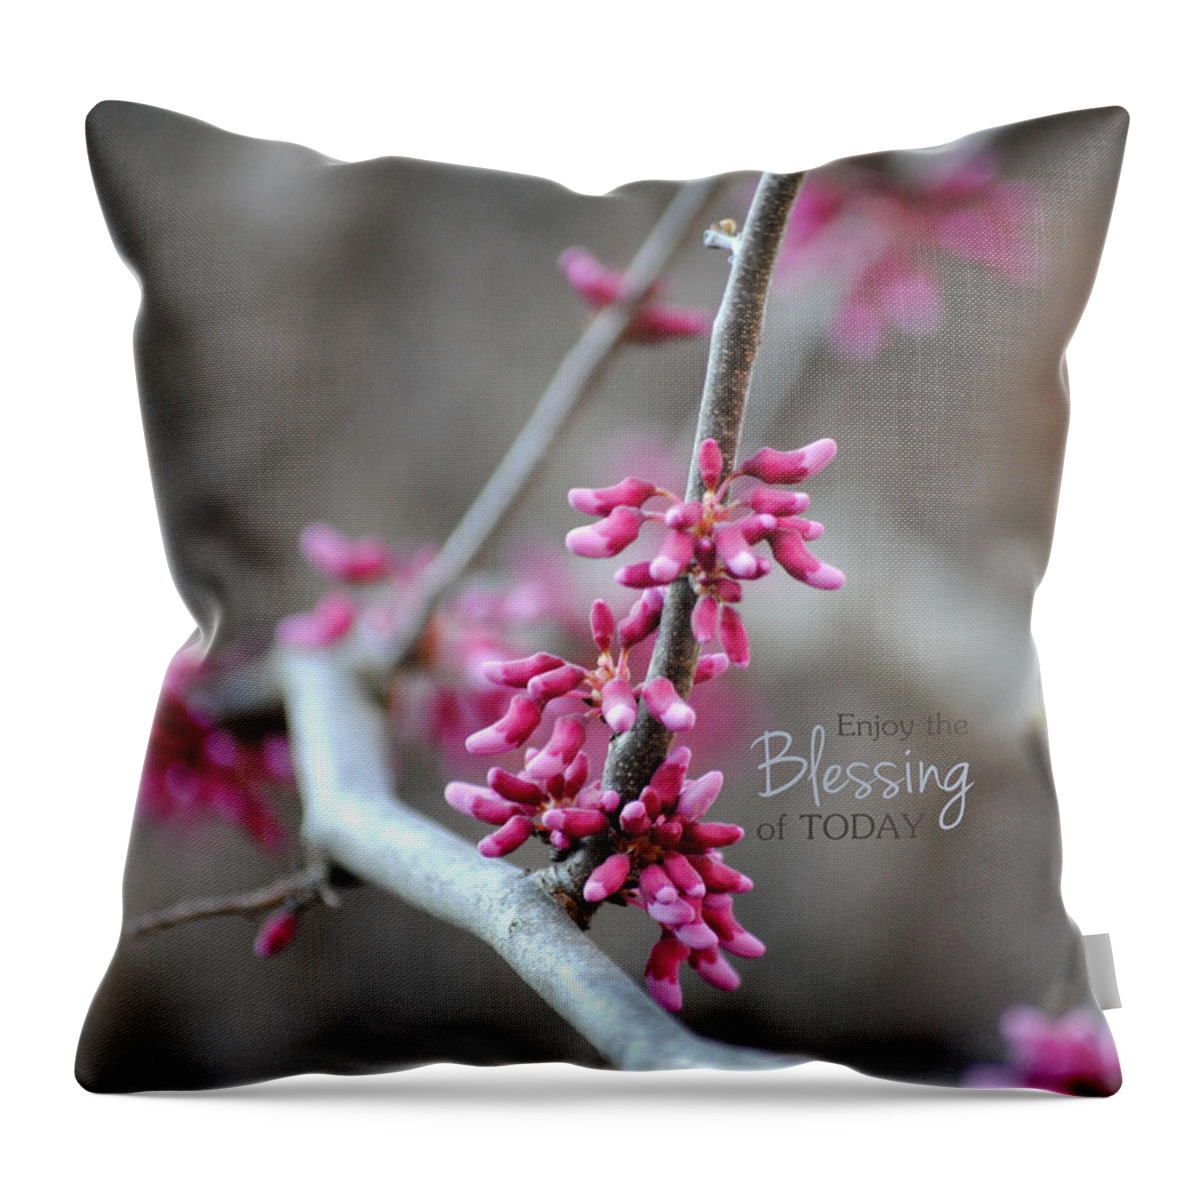 Blessing Throw Pillow featuring the photograph Blessing by Jai Johnson